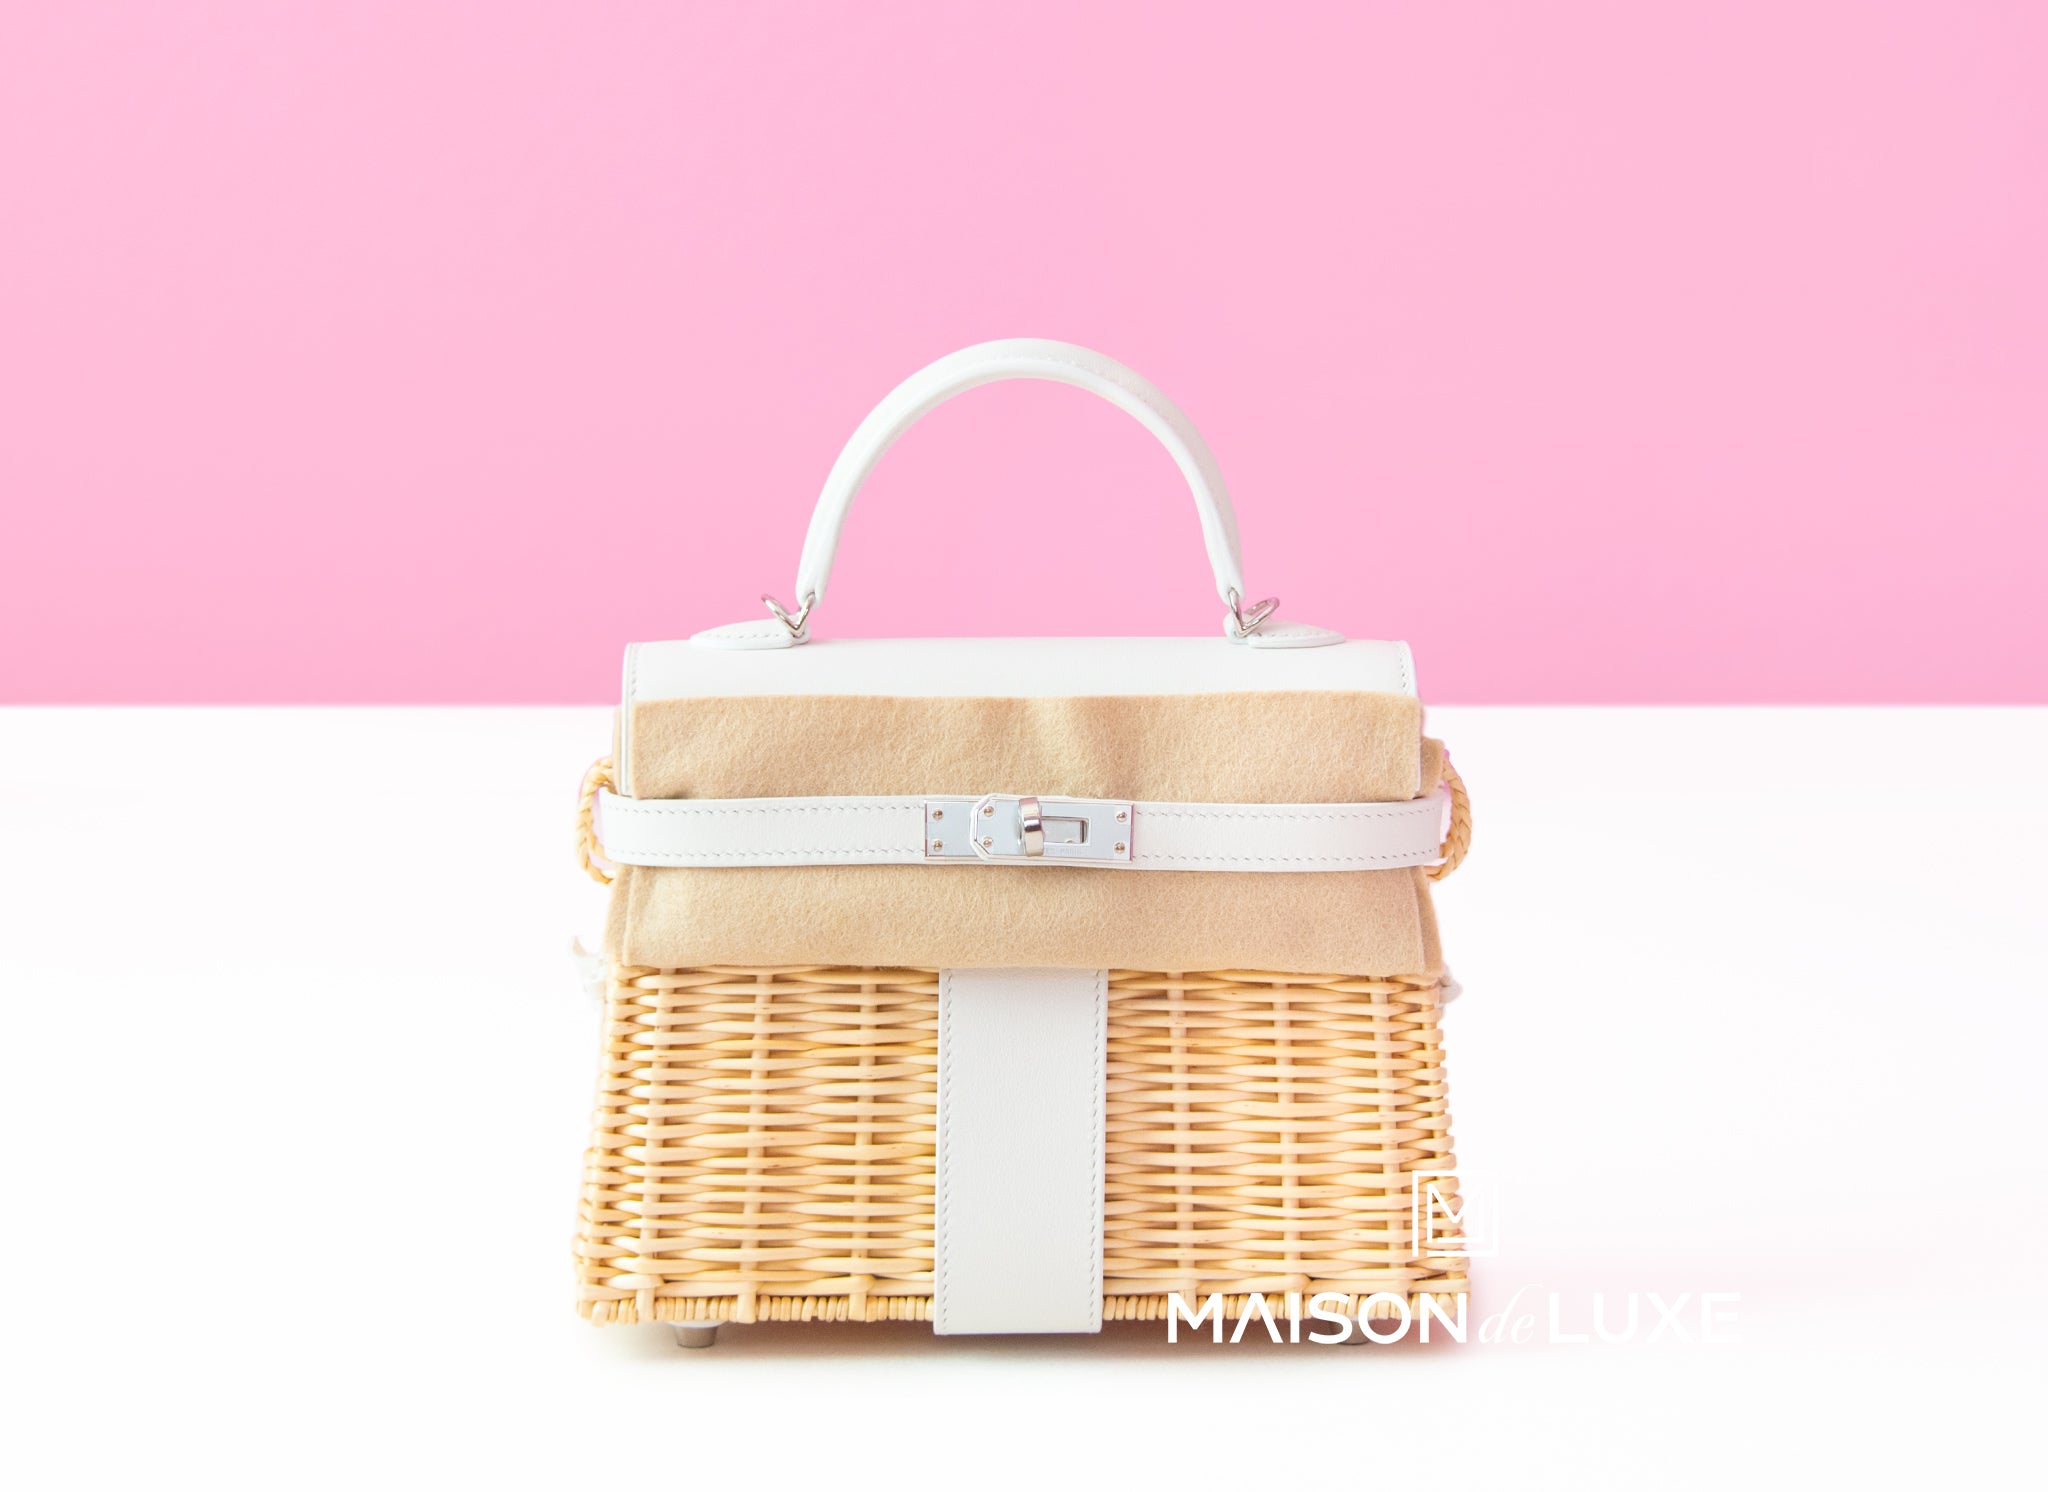 Hermès White Mini Kelly Picnic 20cm of Osier Wicker and Swift Leather with  Palladium Hardware, Handbags & Accessories Online, Ecommerce Retail